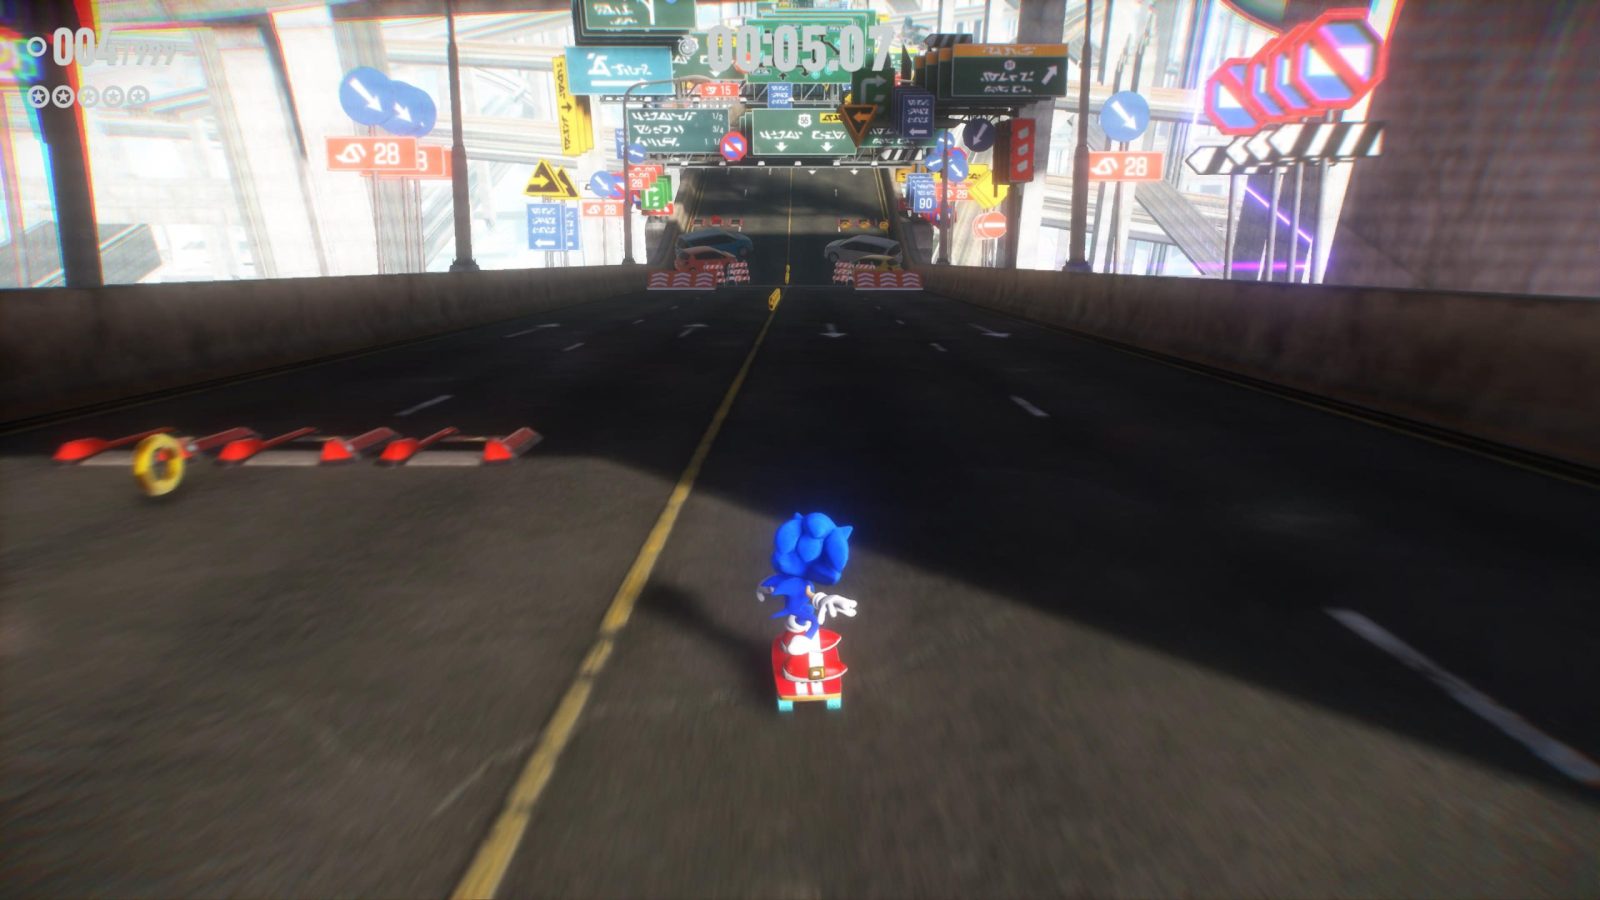 Sonic Frontiers update brings new Challenge mode, Photo Mode, and